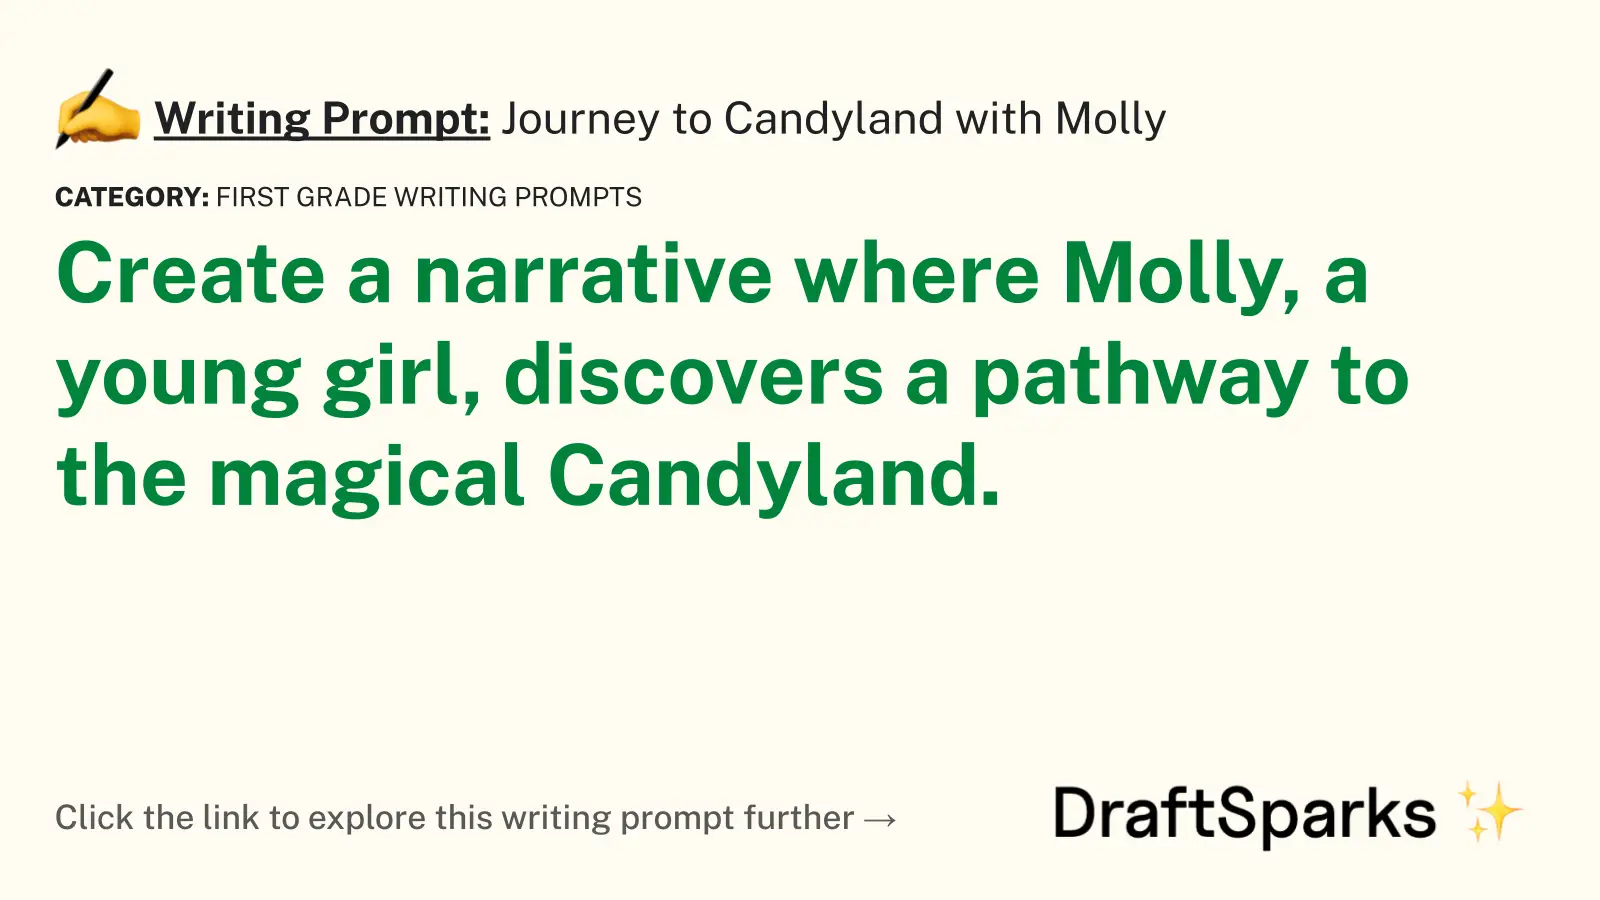 Journey to Candyland with Molly